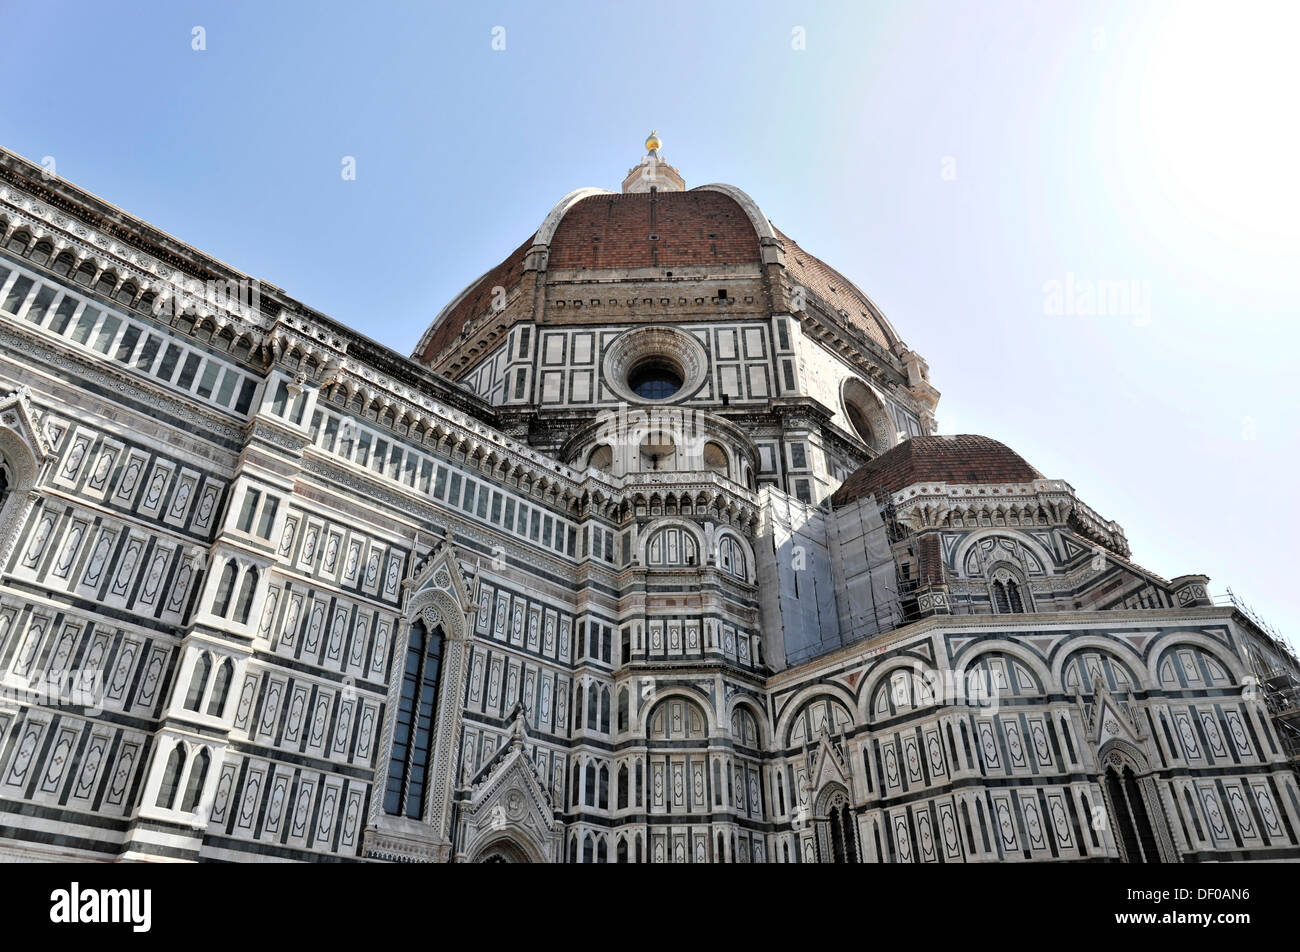 Cattedrale di Santa Maria del Fiore, Florence Cathedral, Florence, Tuscany, Italy, Europe Stock Photo